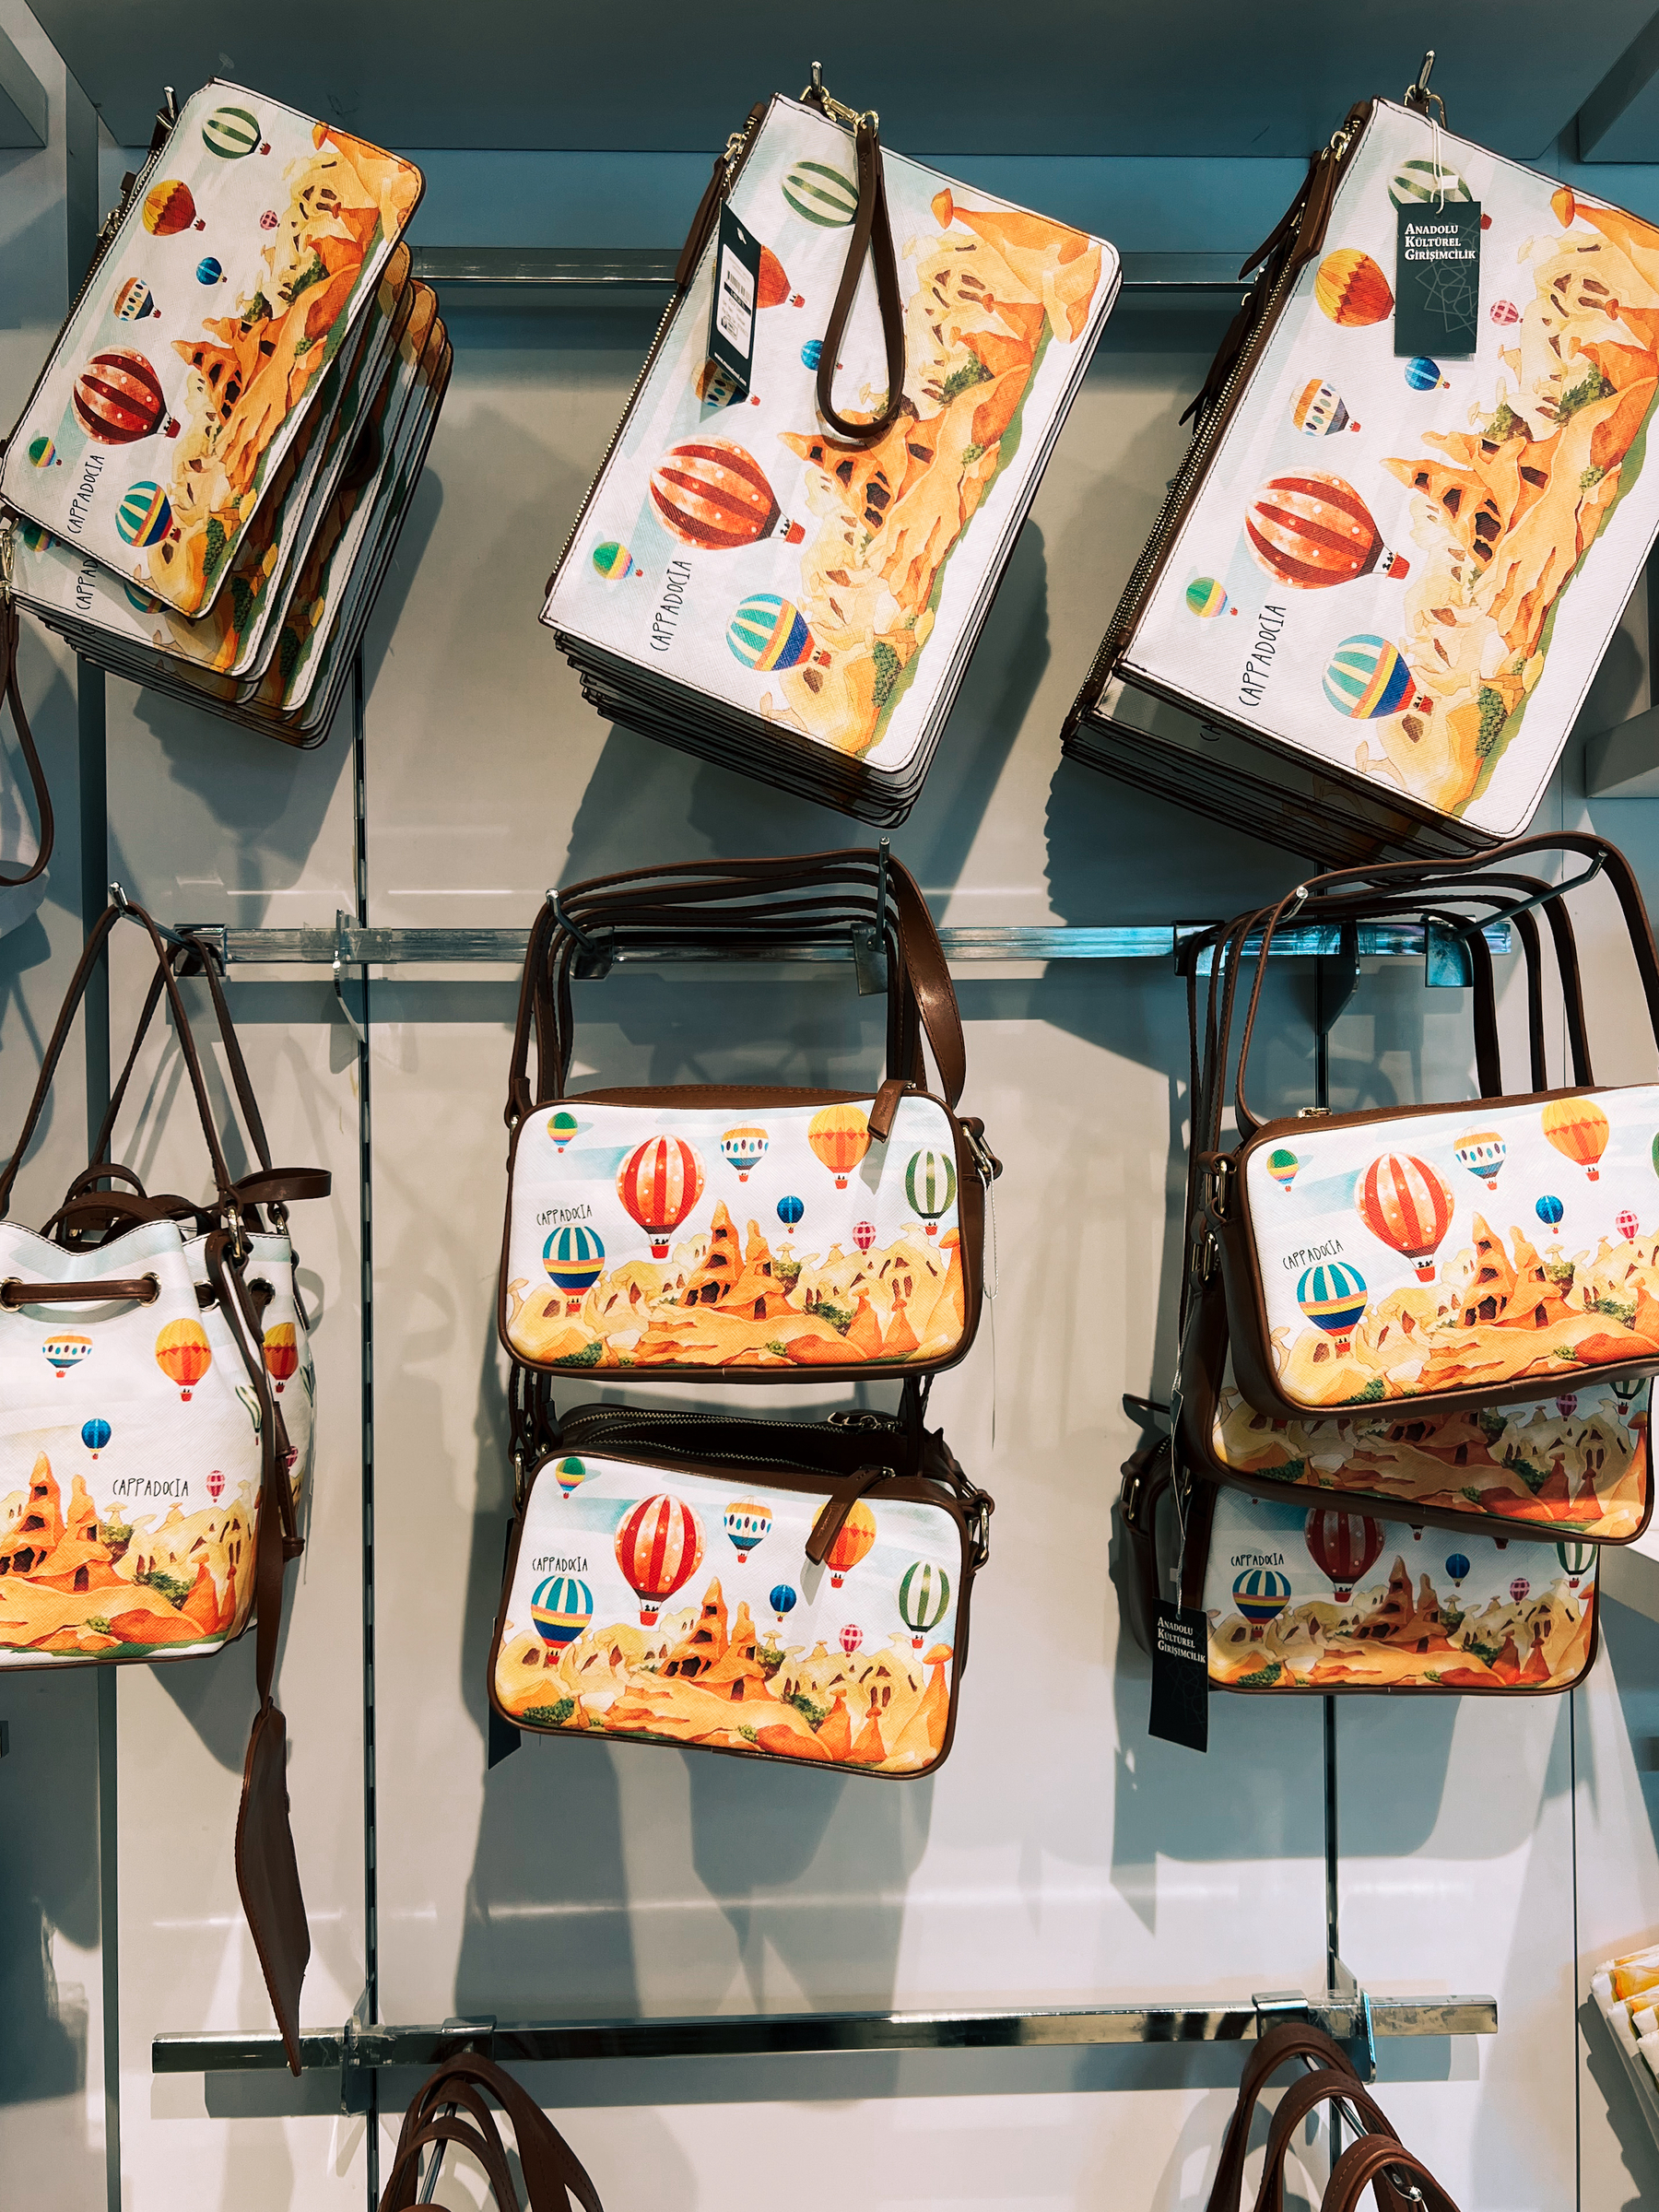 Bags for sale, with hot air balloon theme.